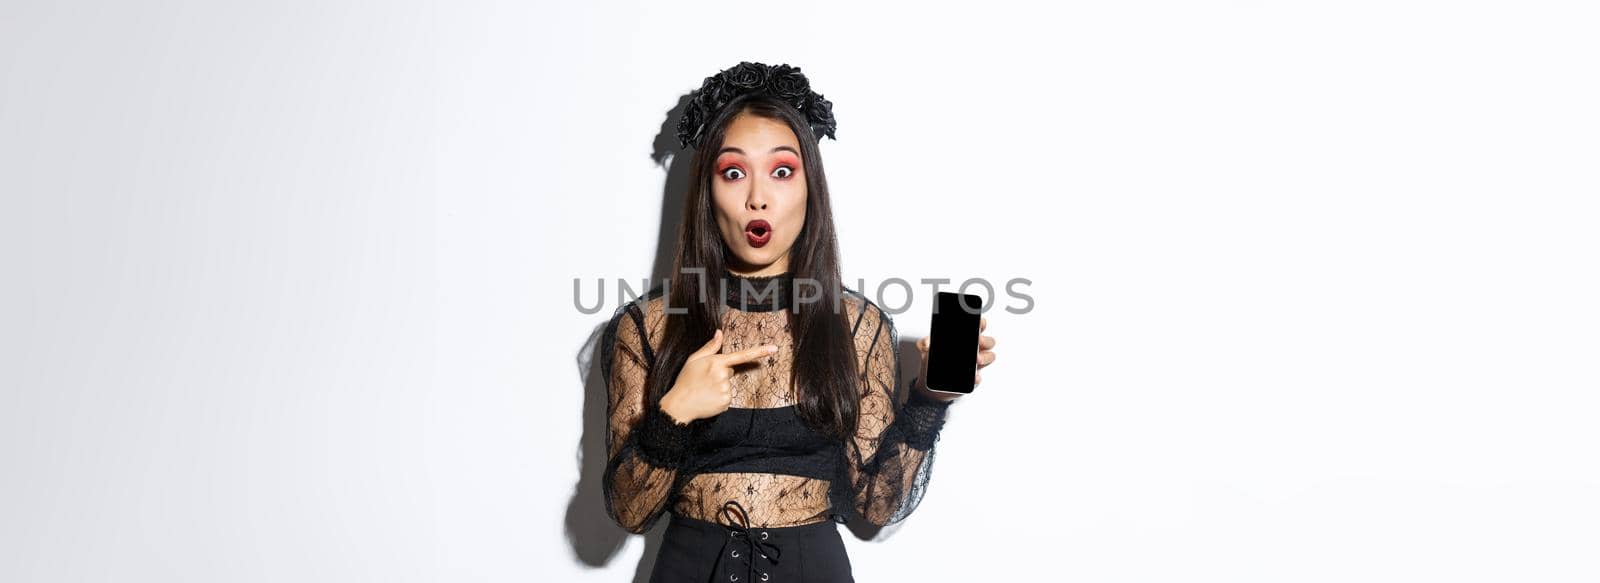 Surprised asian girl in black gothic dress with wreath, gasping amused and pointing finger at mobile phone display, showing halloween banner or promo, standing over white background by Benzoix